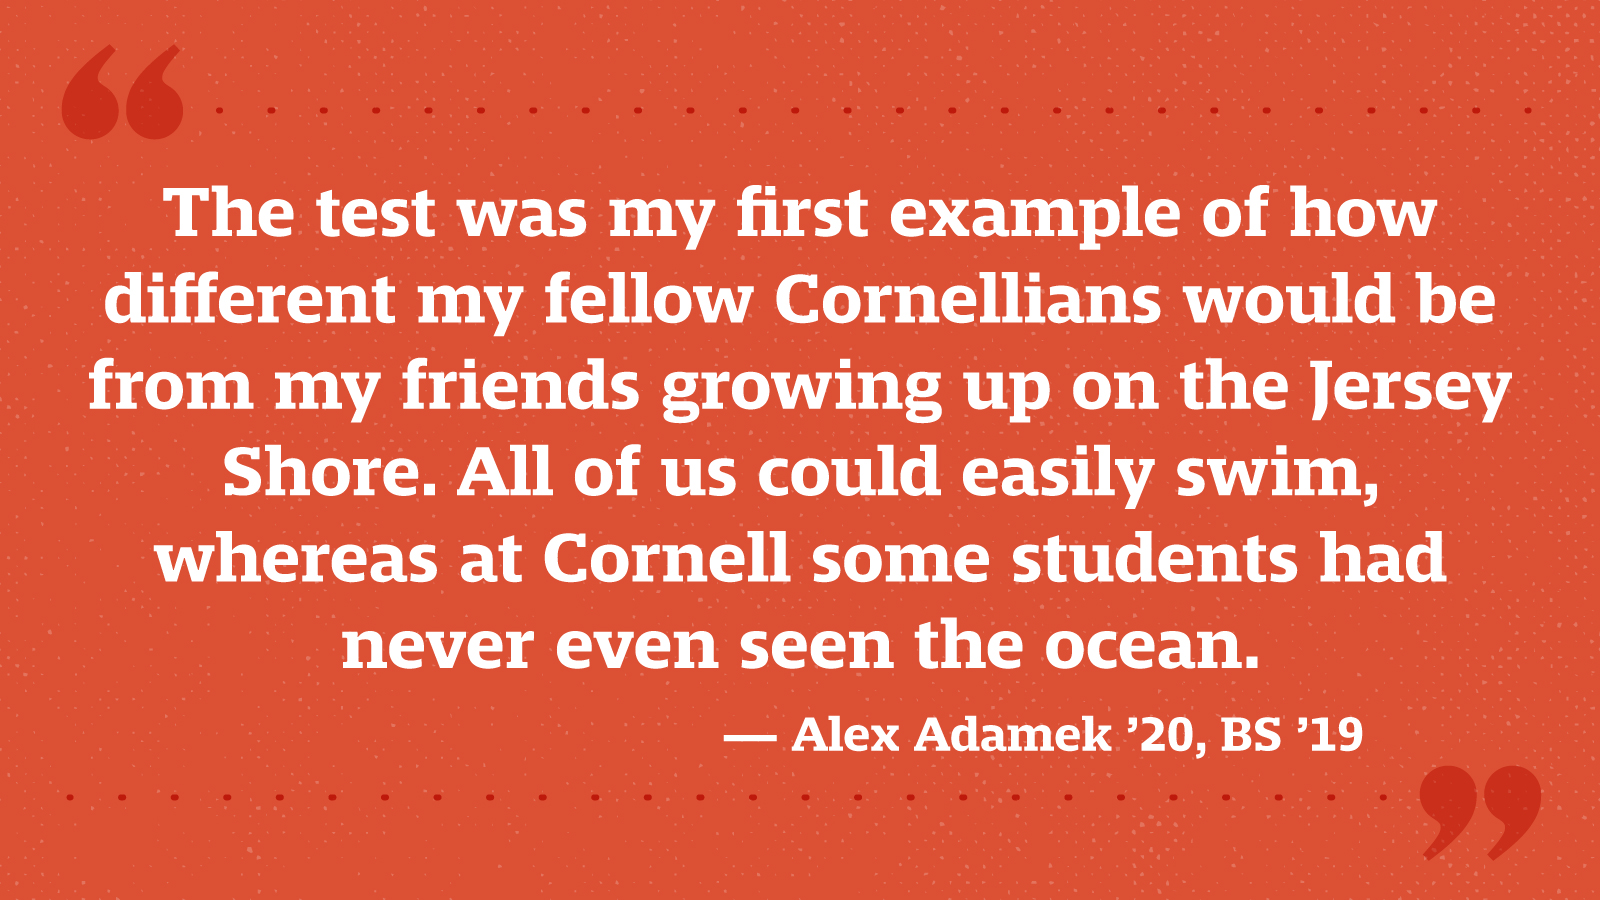 The test was my first example of how different my fellow Cornellians would be from my friends growing up on the Jersey Shore. All of us could easily swim, whereas at Cornell some students had never even seen the ocean. — Alex Adamek ’20, BS ’19